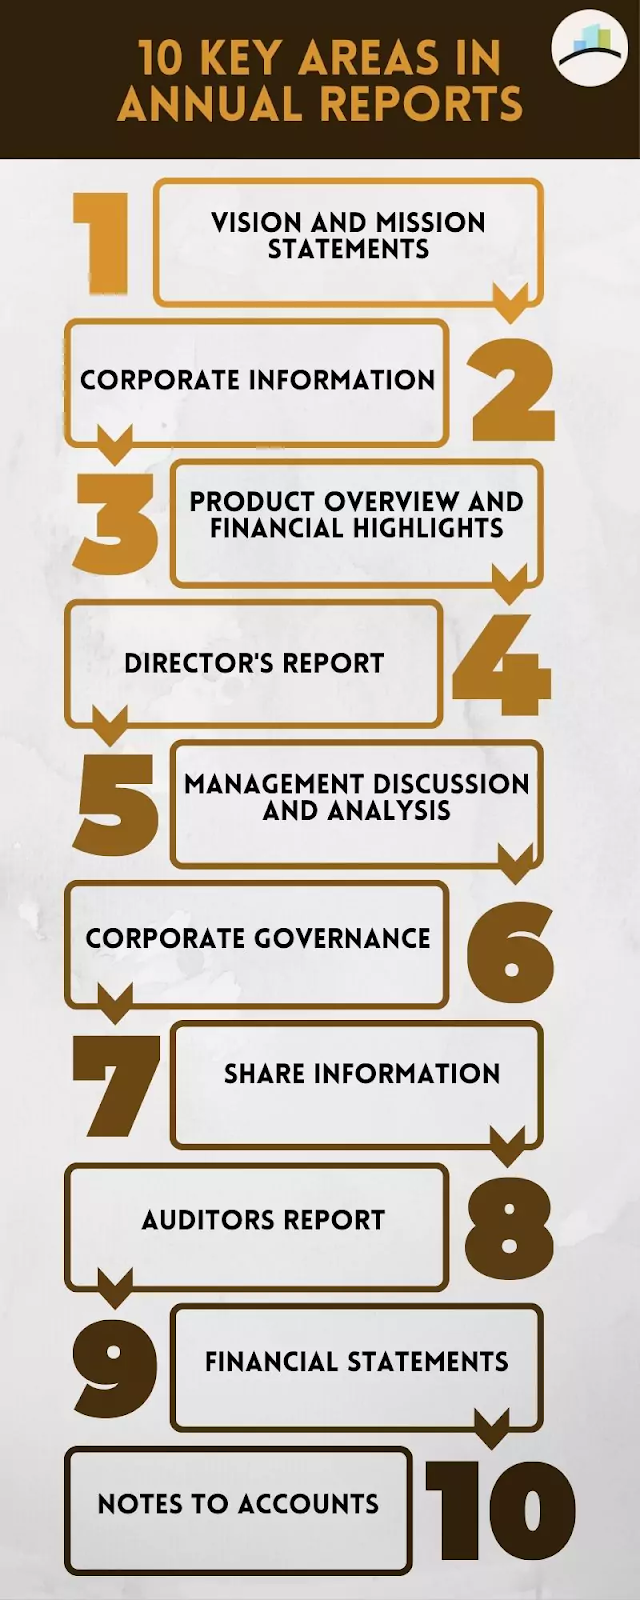 Key areas of annual report 